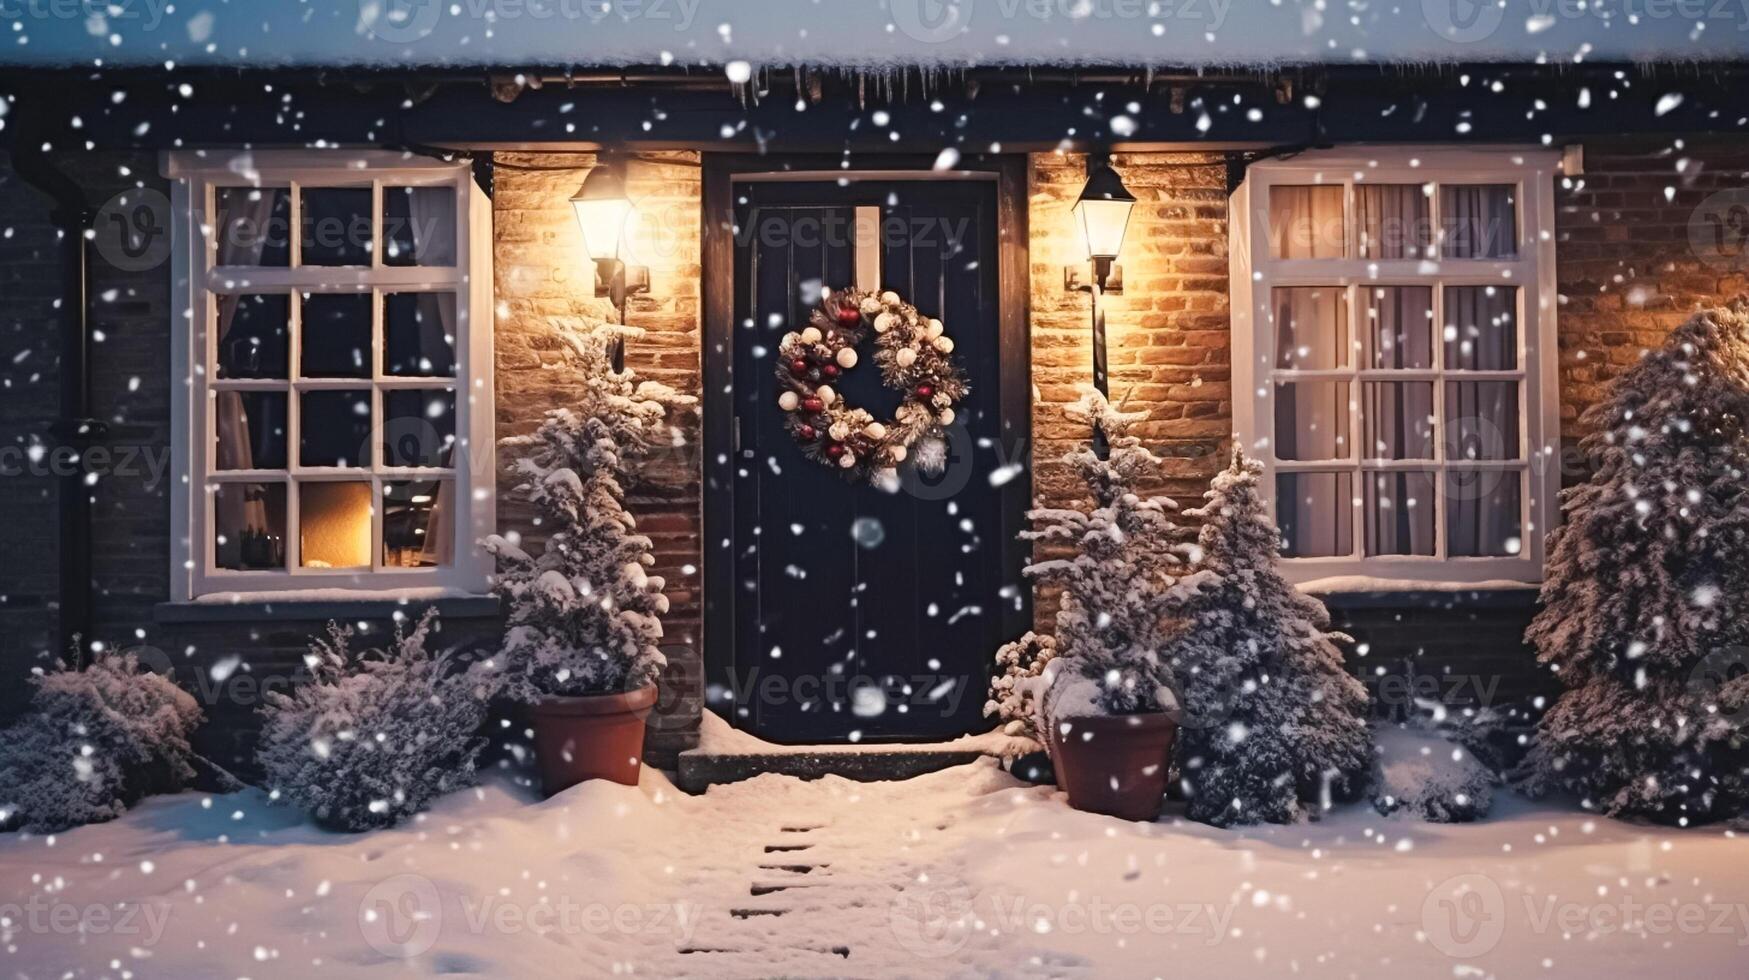 Christmas in the countryside, cottage and garden decorated for holidays on a snowy winter evening with snow and holiday lights, English country styling photo